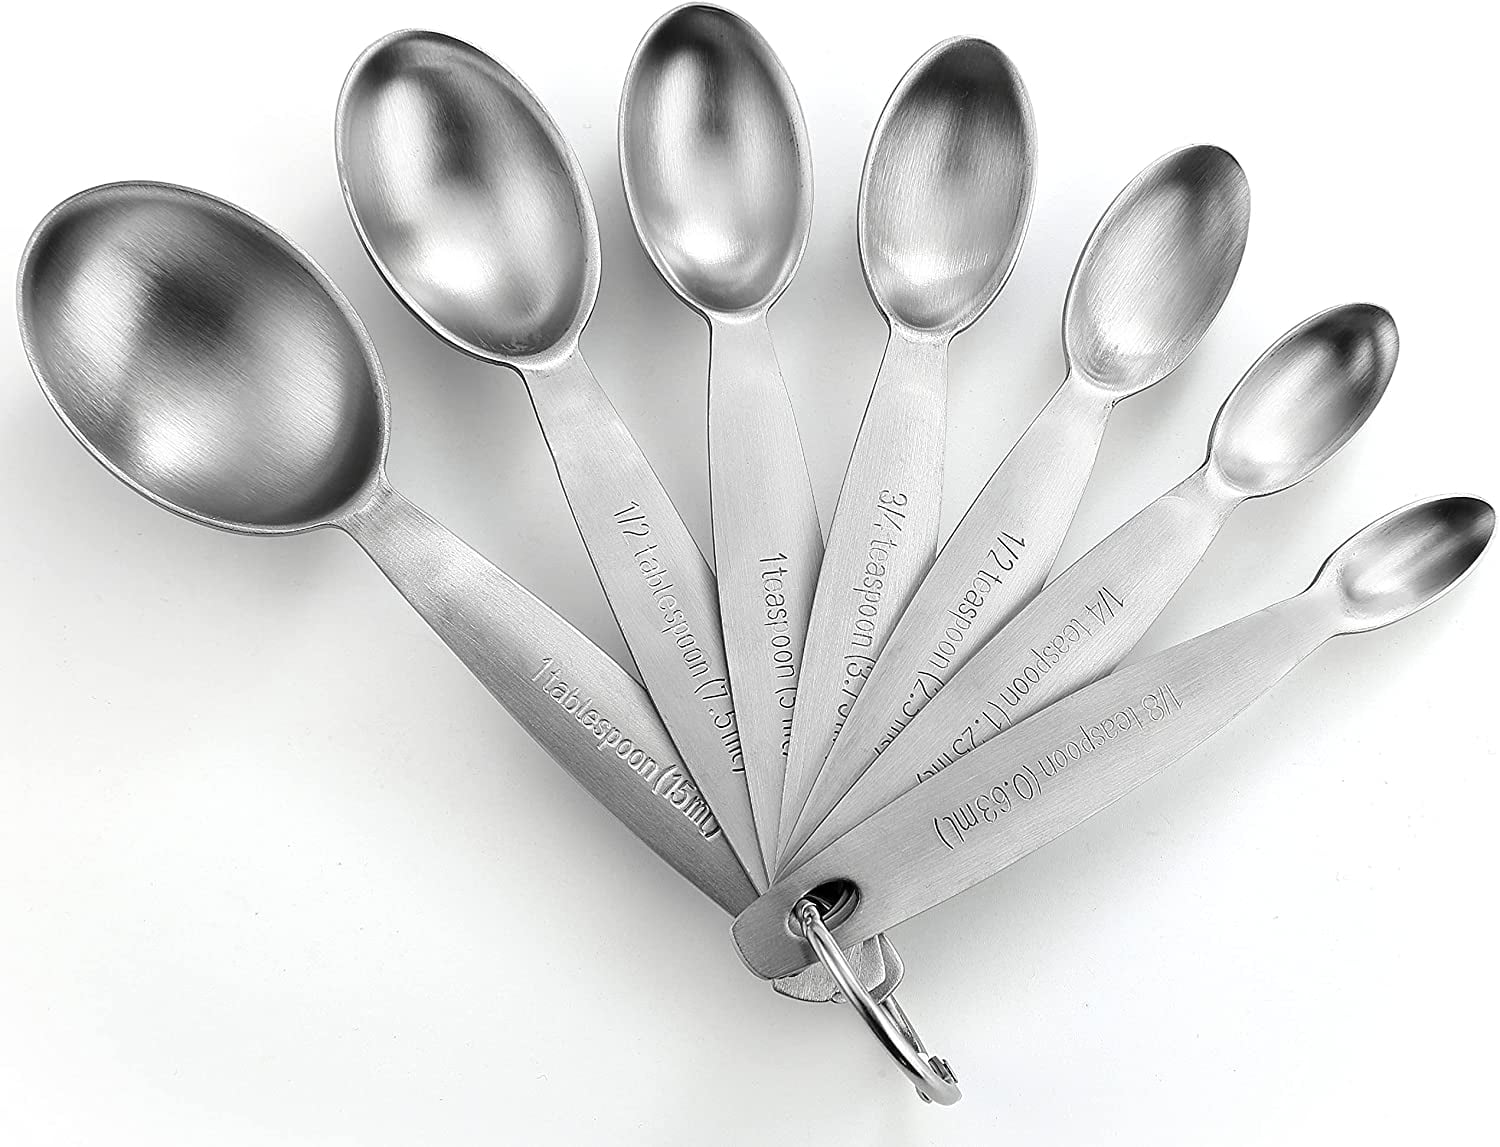 Vollrath (46588) Stainless Steel 6-Piece Oval Measuring Spoon Set